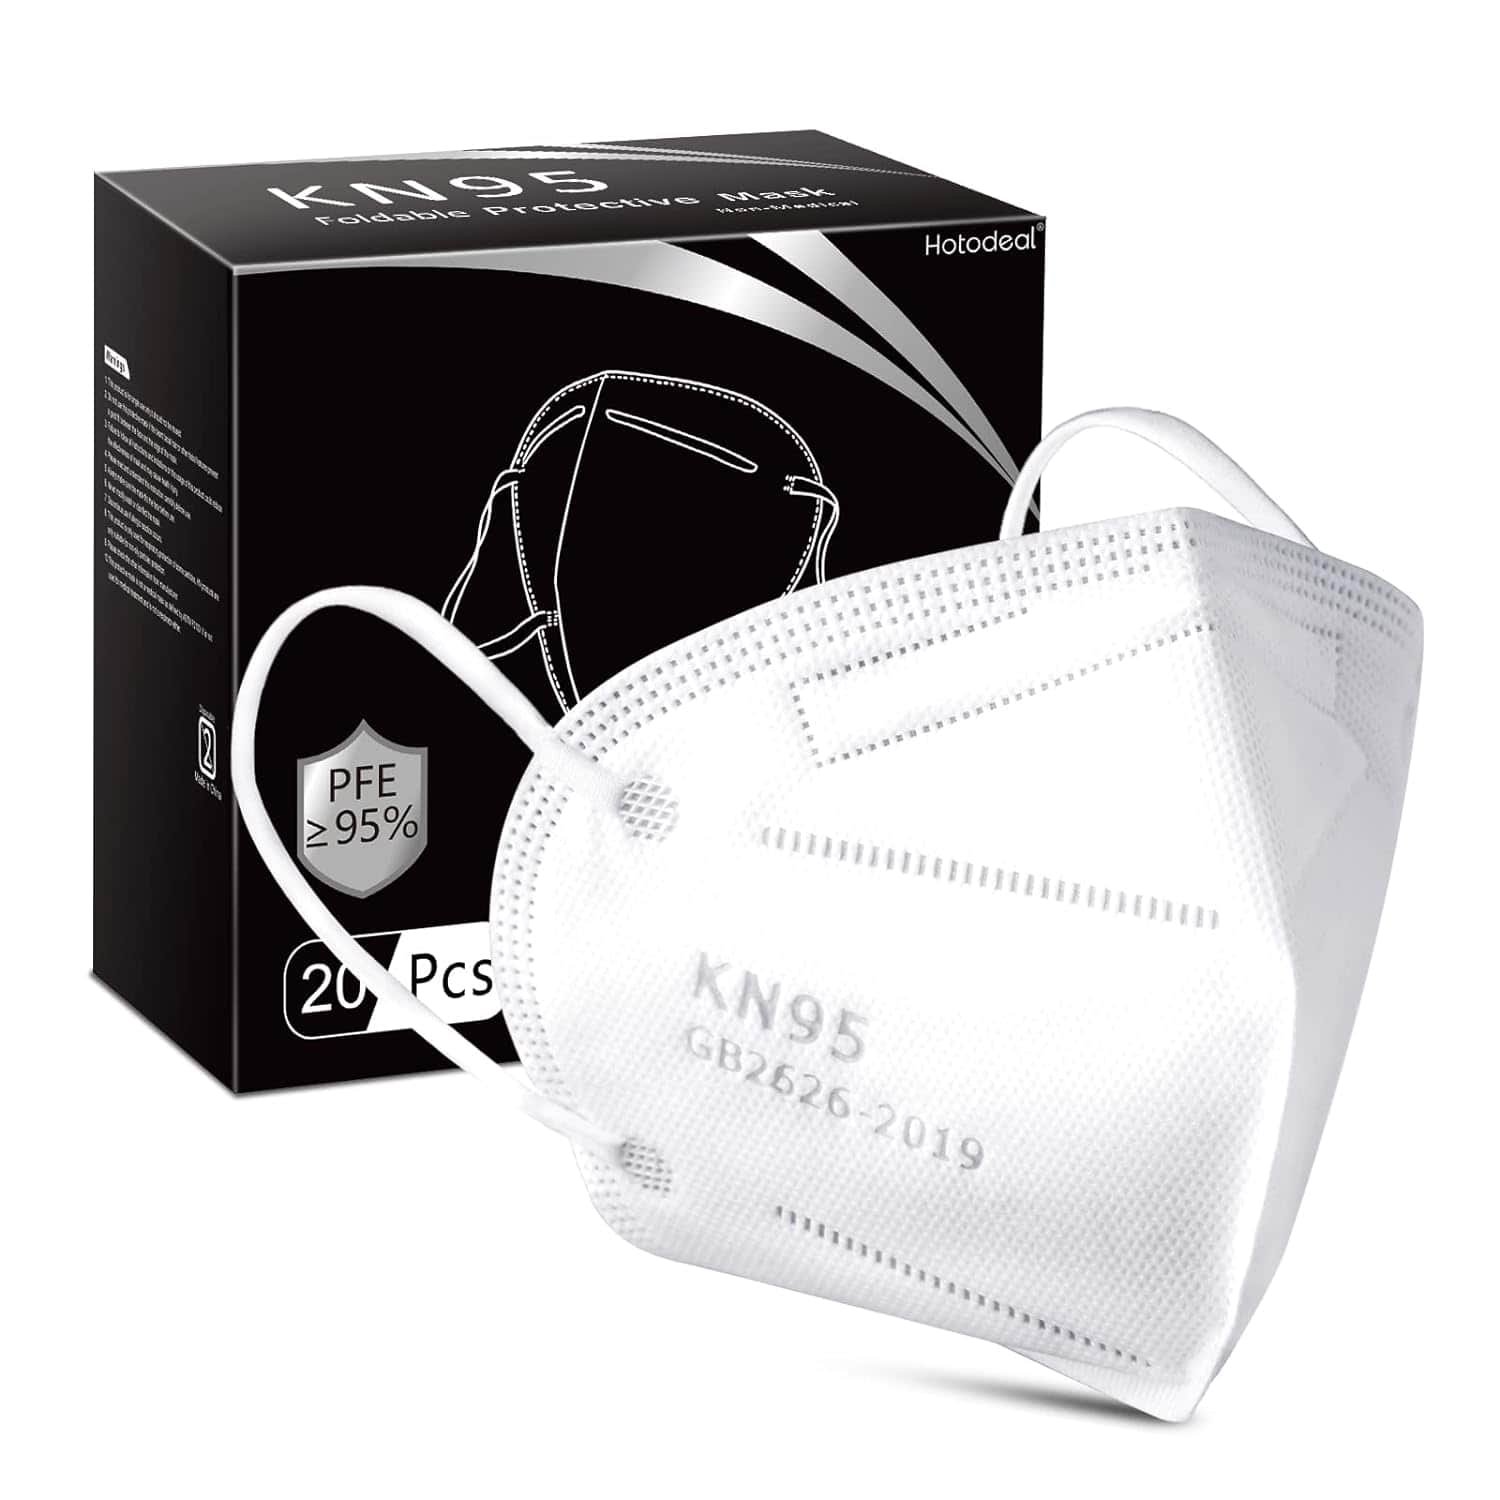 KN95 High Quality Filtering Earloop White Masks Face in Large